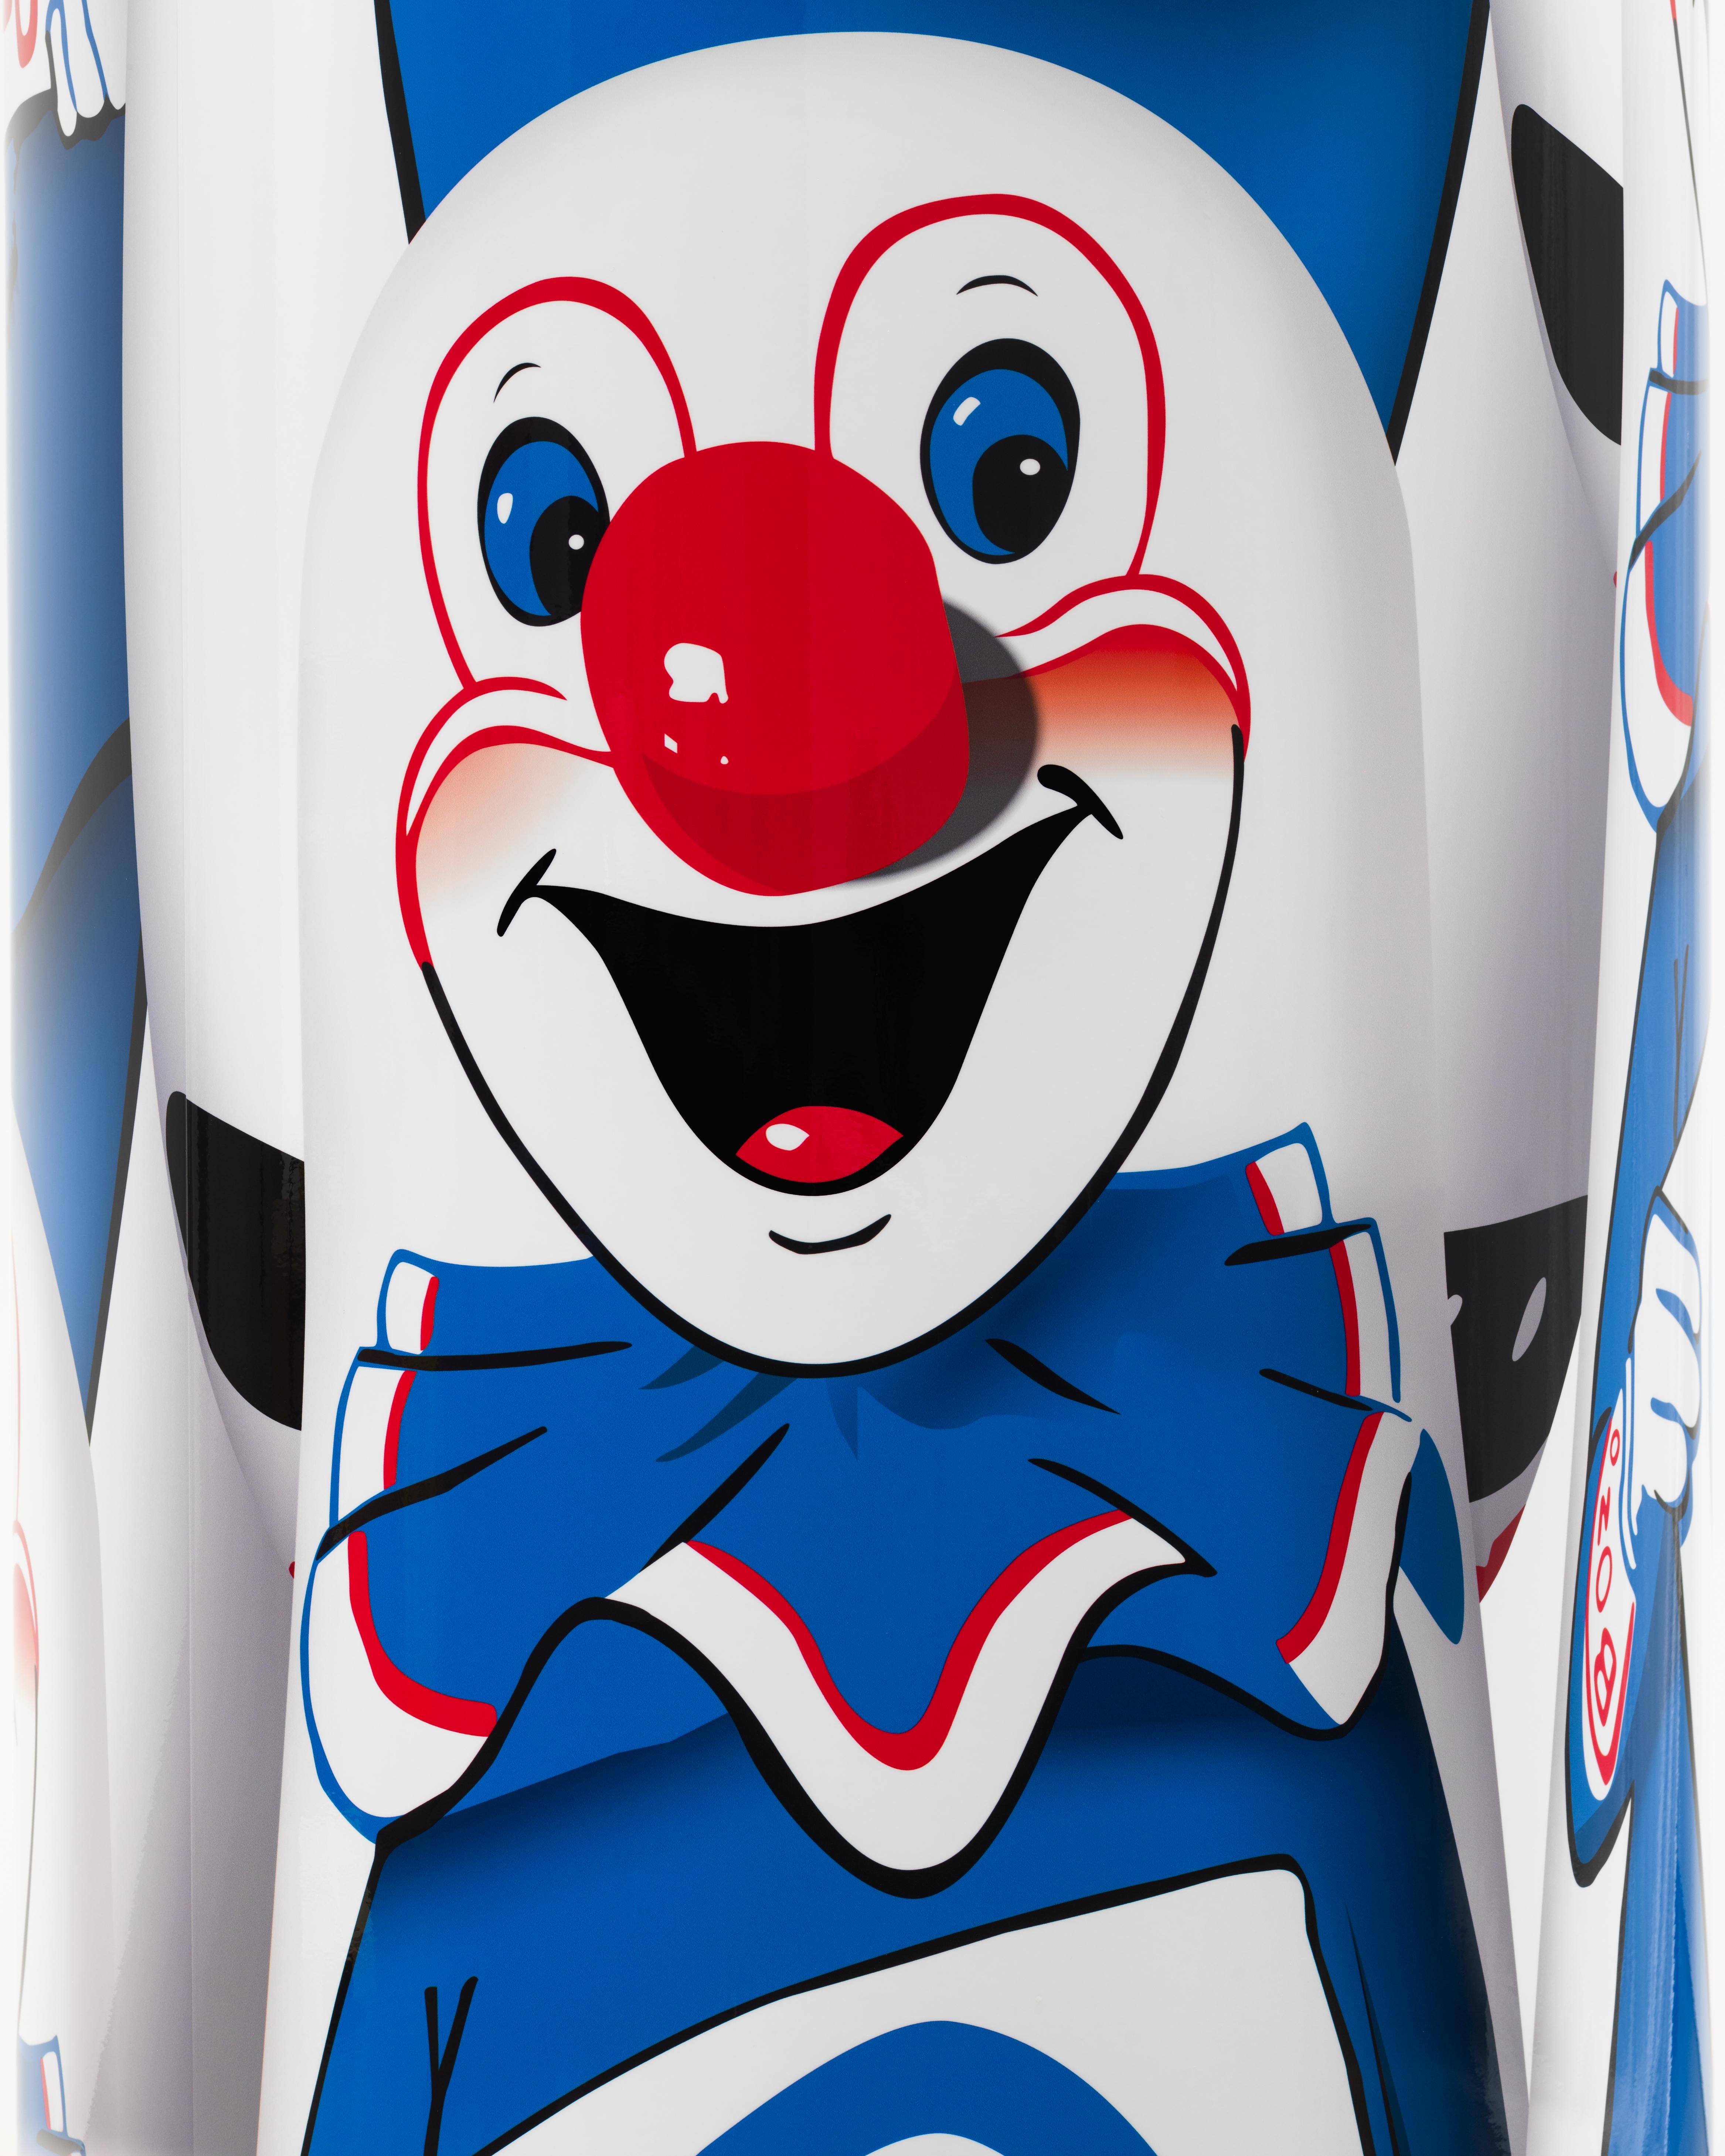 Detail of a cylindrical sculpture wrapped with the image of a white, red, and blue clown